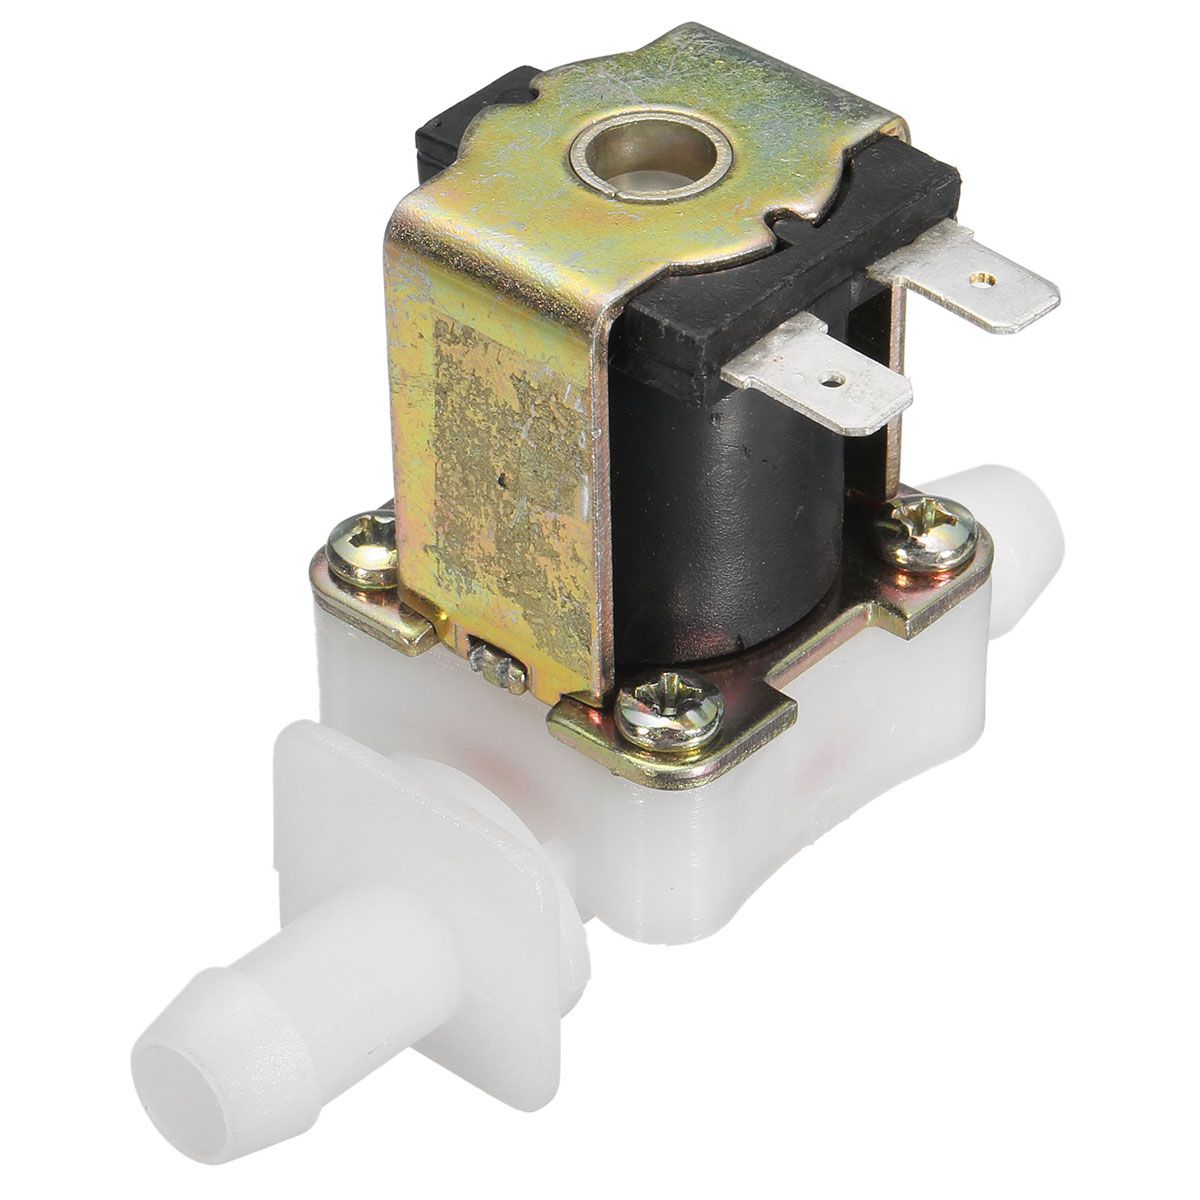 12V-DC-Electric-Solenoid-Valve-Water-Air-Inlet-Flow-Switch-Normally-Closed-12mm-1156990